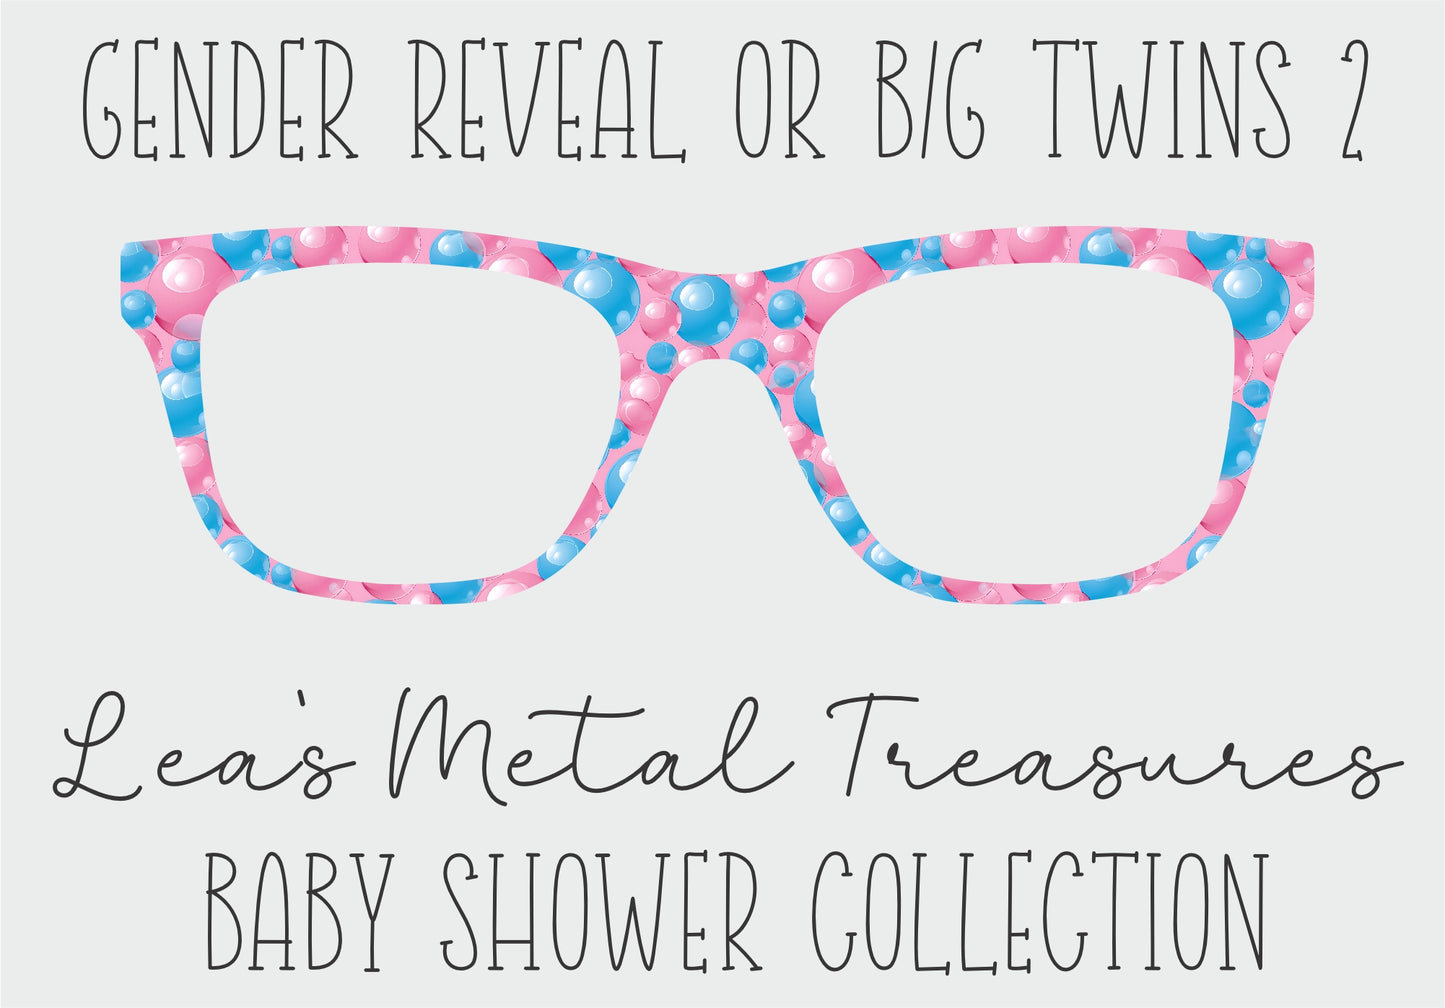 Gender Reveal B-G Twins 2 TOPPER COMES WITH MAGNETS